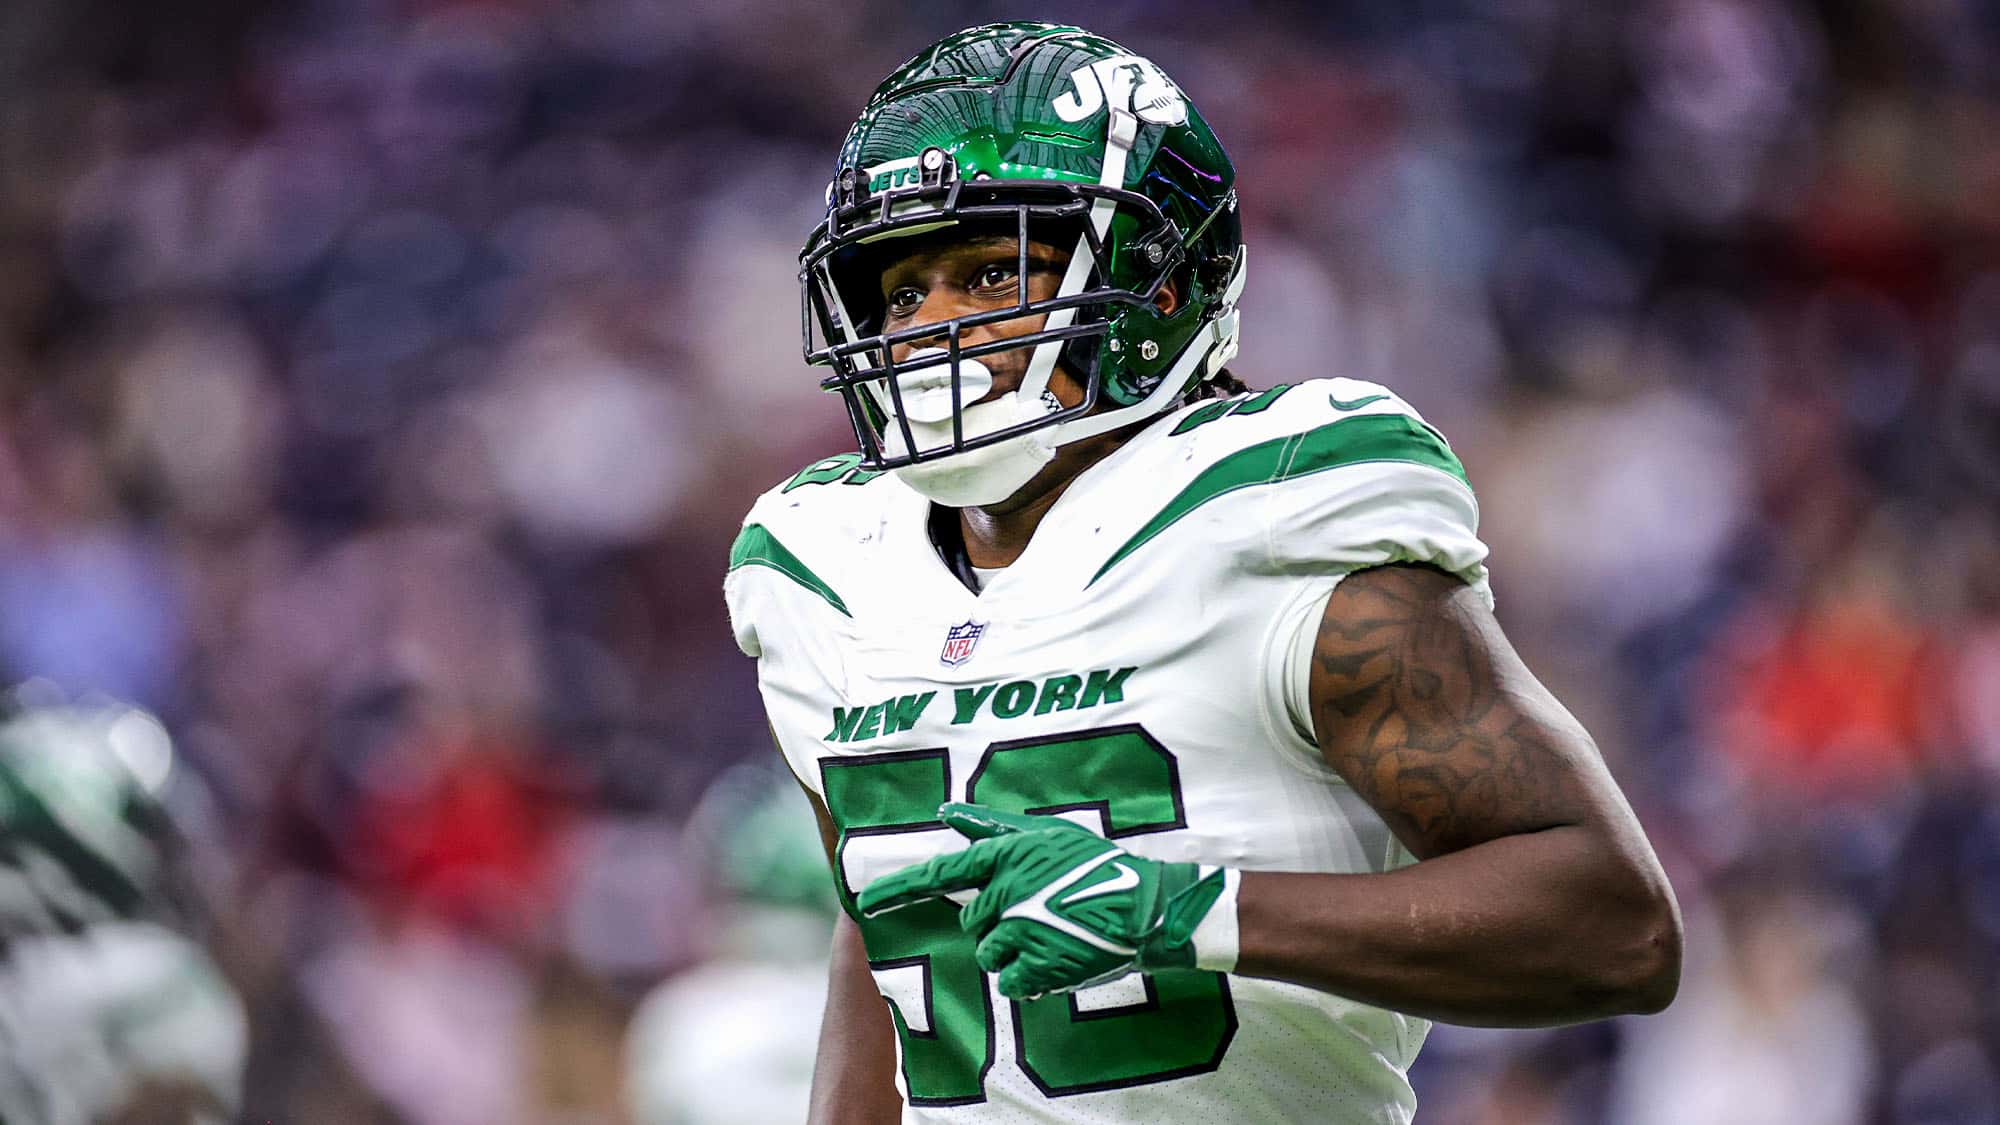 Quincy Williams, New York Jets, Stats, Contract